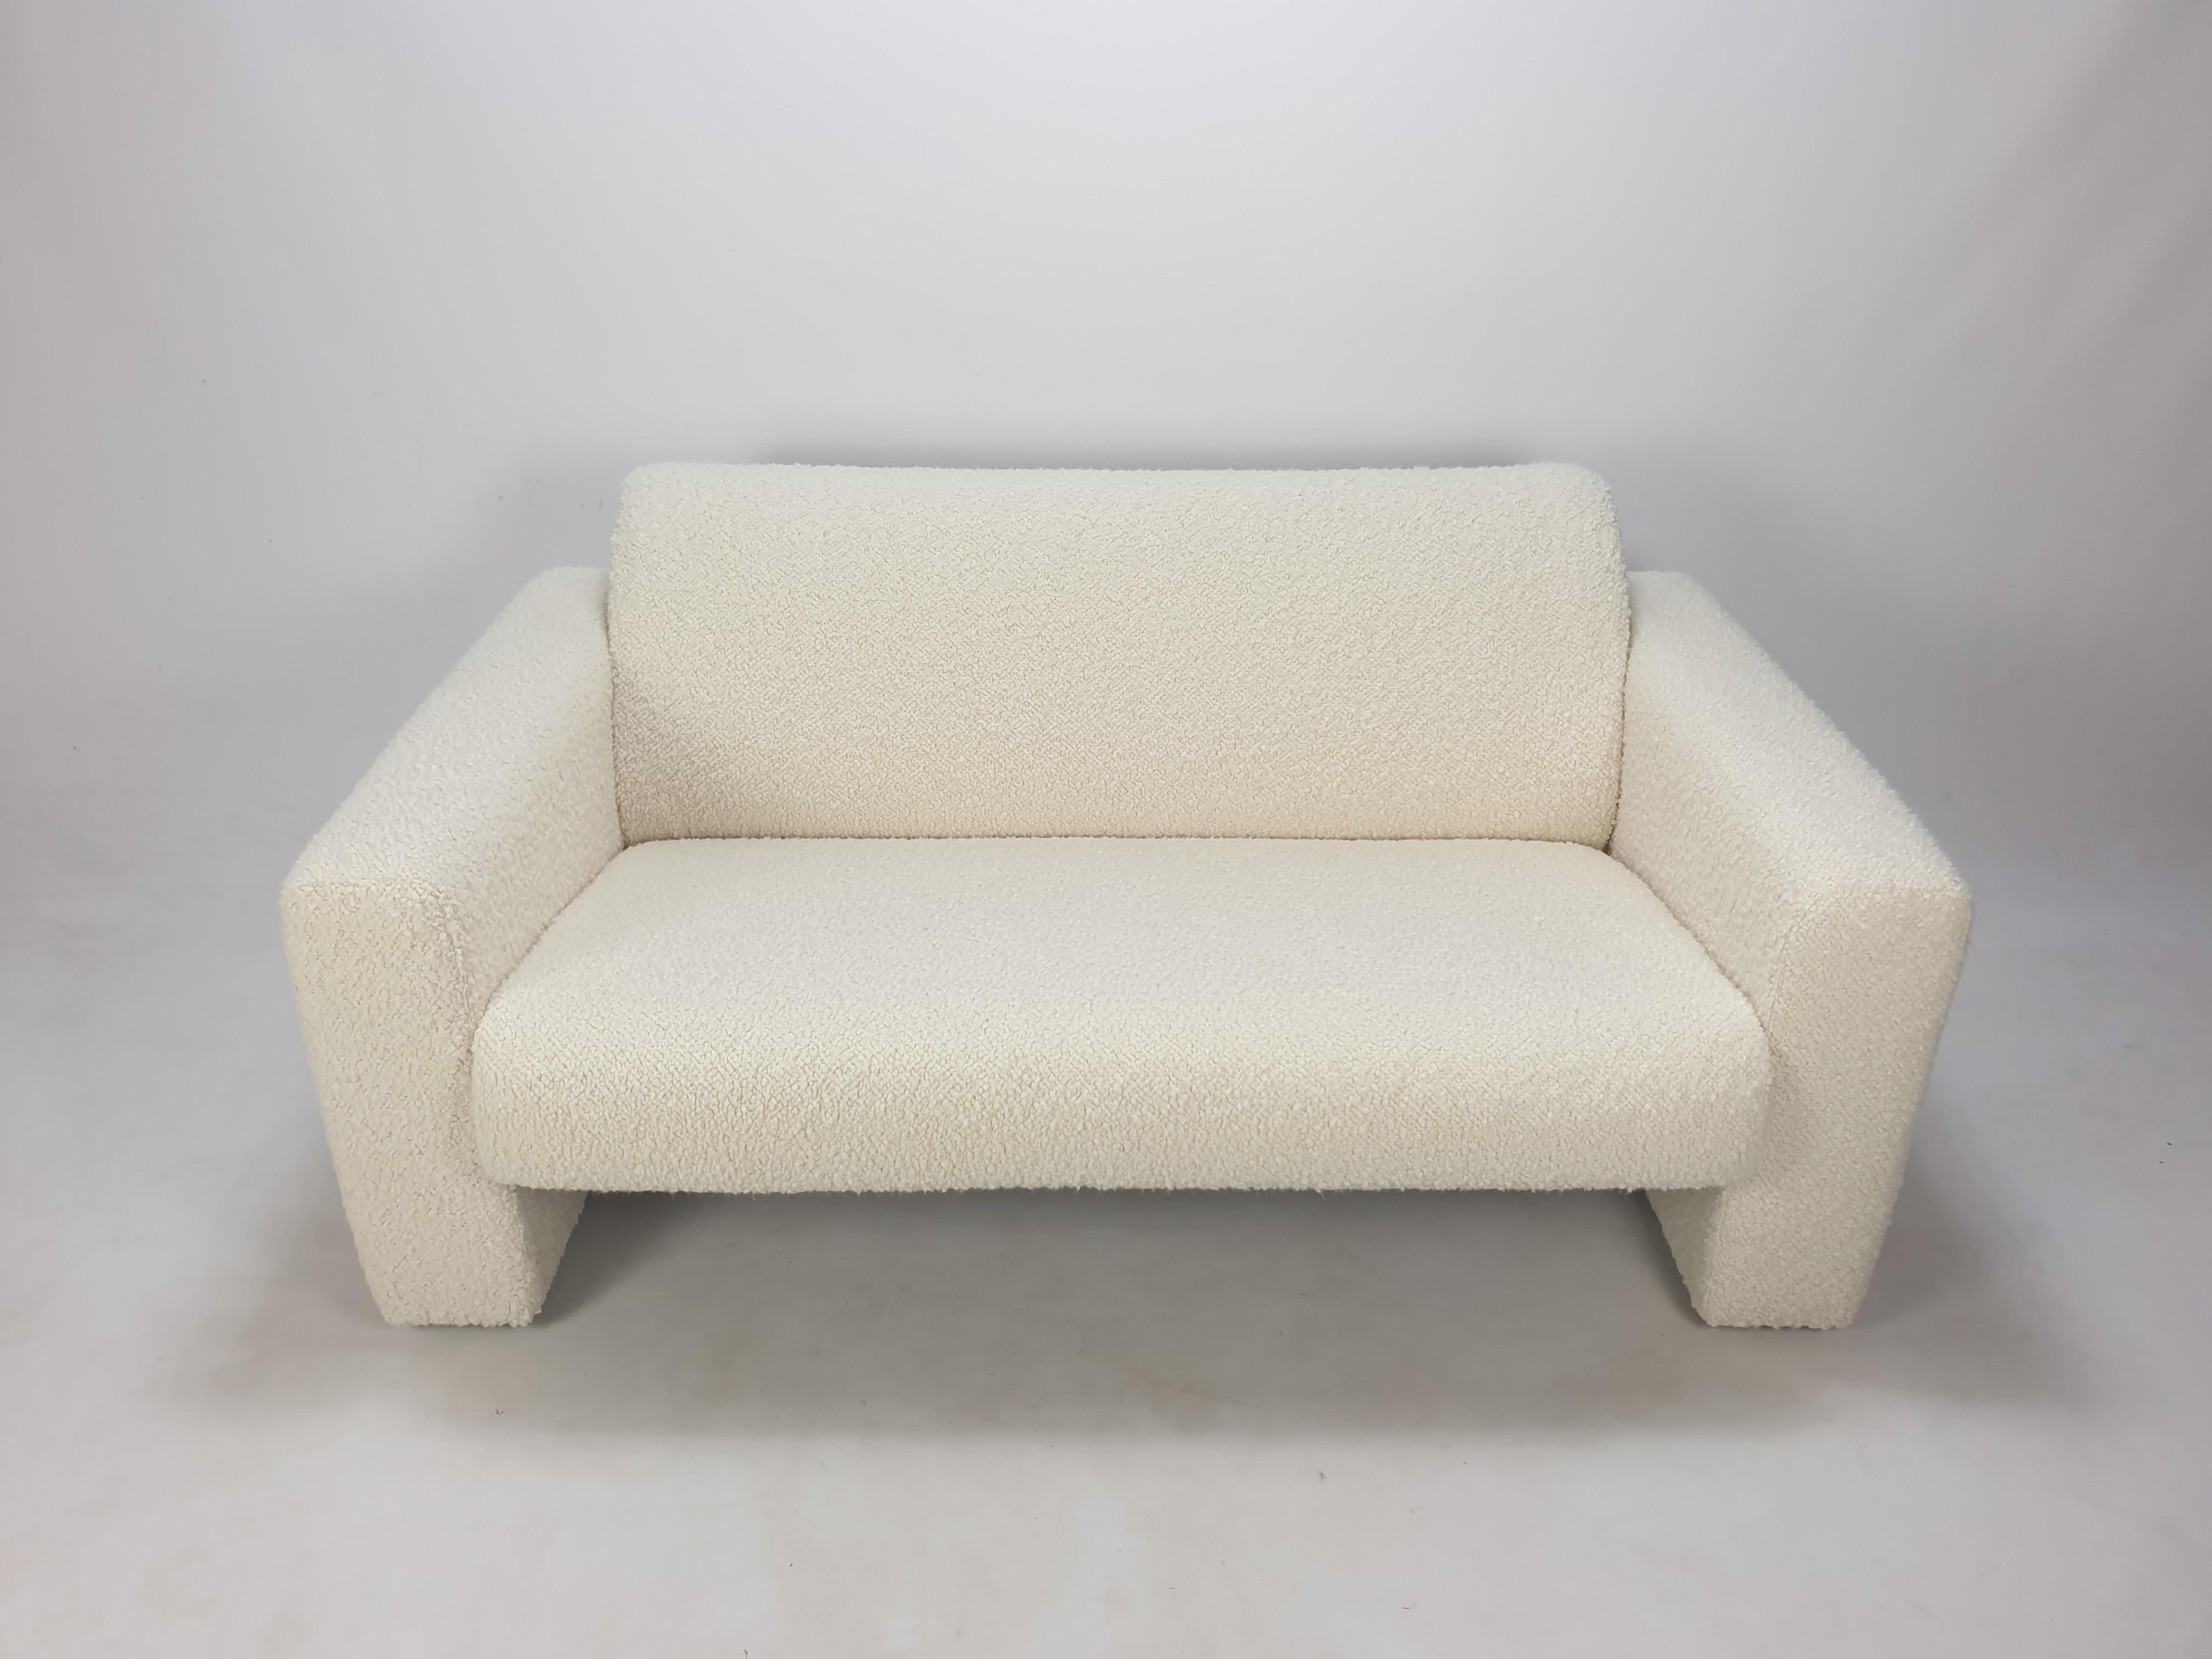 Woven Model 691 2-Seat Sofa by Artifort, 1980s For Sale